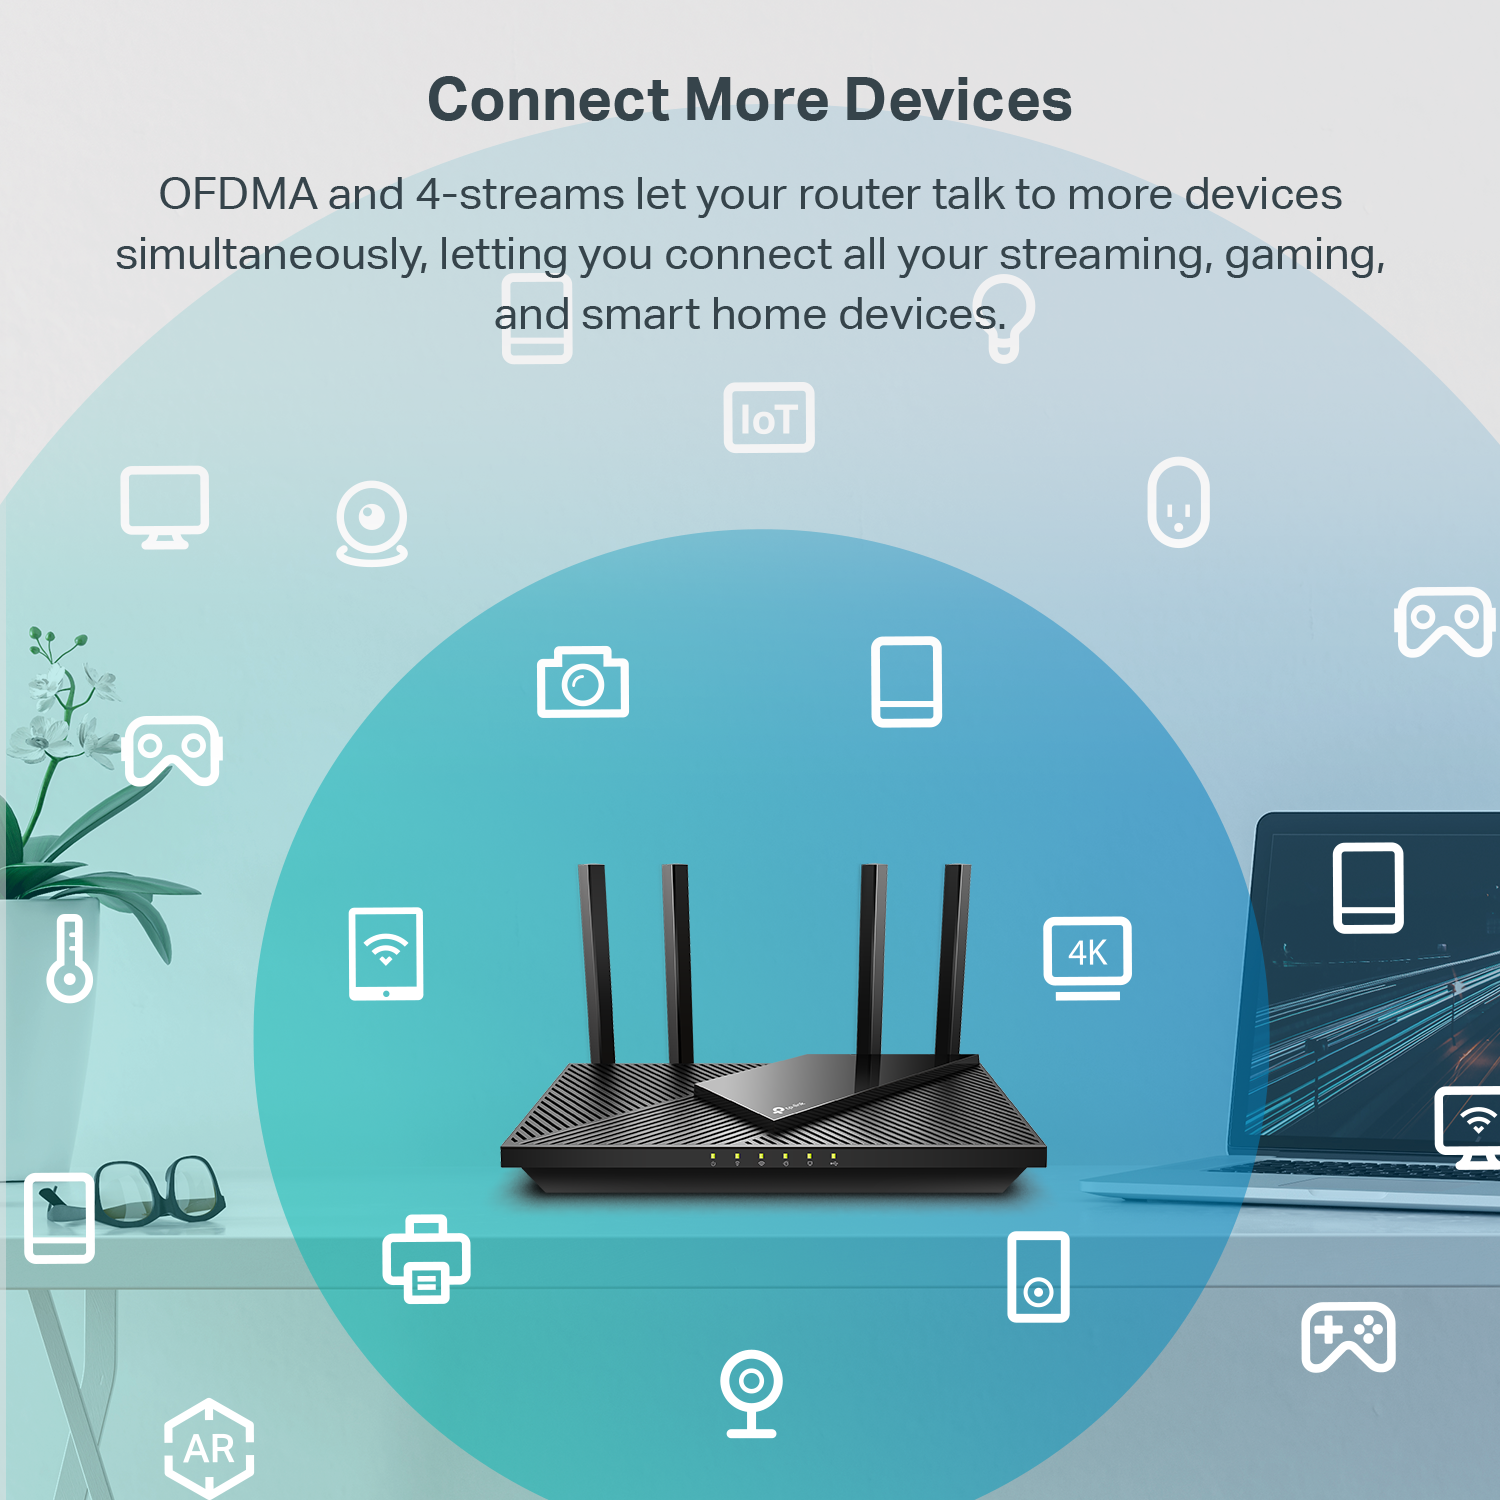 tp-link AX3000 Dual Band Gigabit WiFi 6 Router Installation Guide